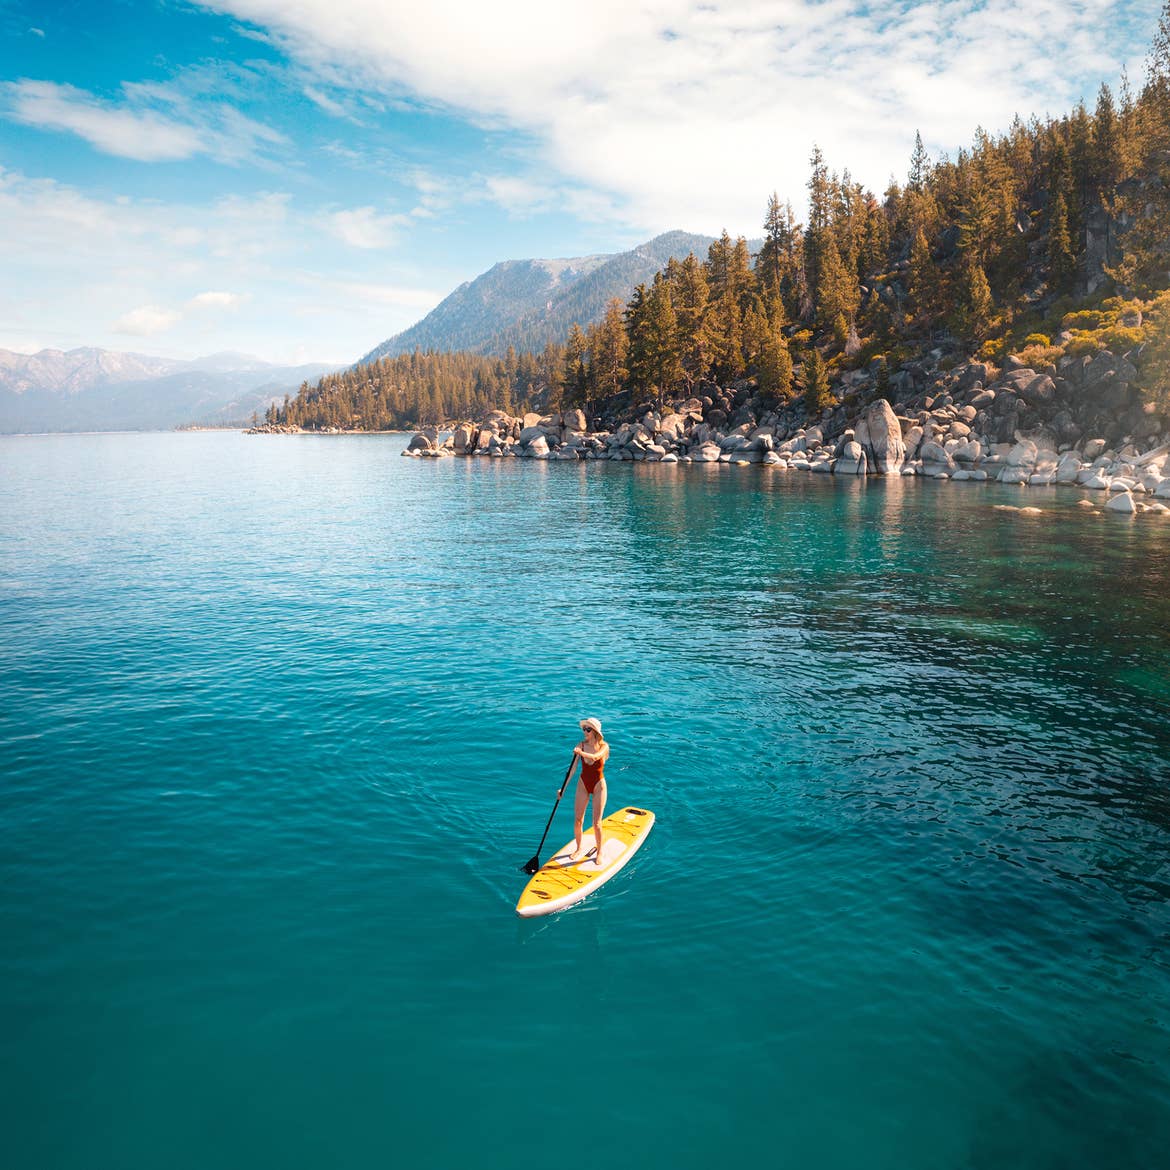 A caucasian woman wears a red one-piece swimsuit and straw sunhat as she stands on a yellow stand up paddle-board in a lake surrounded by sunlight, cloudy blue sky and pine trees.